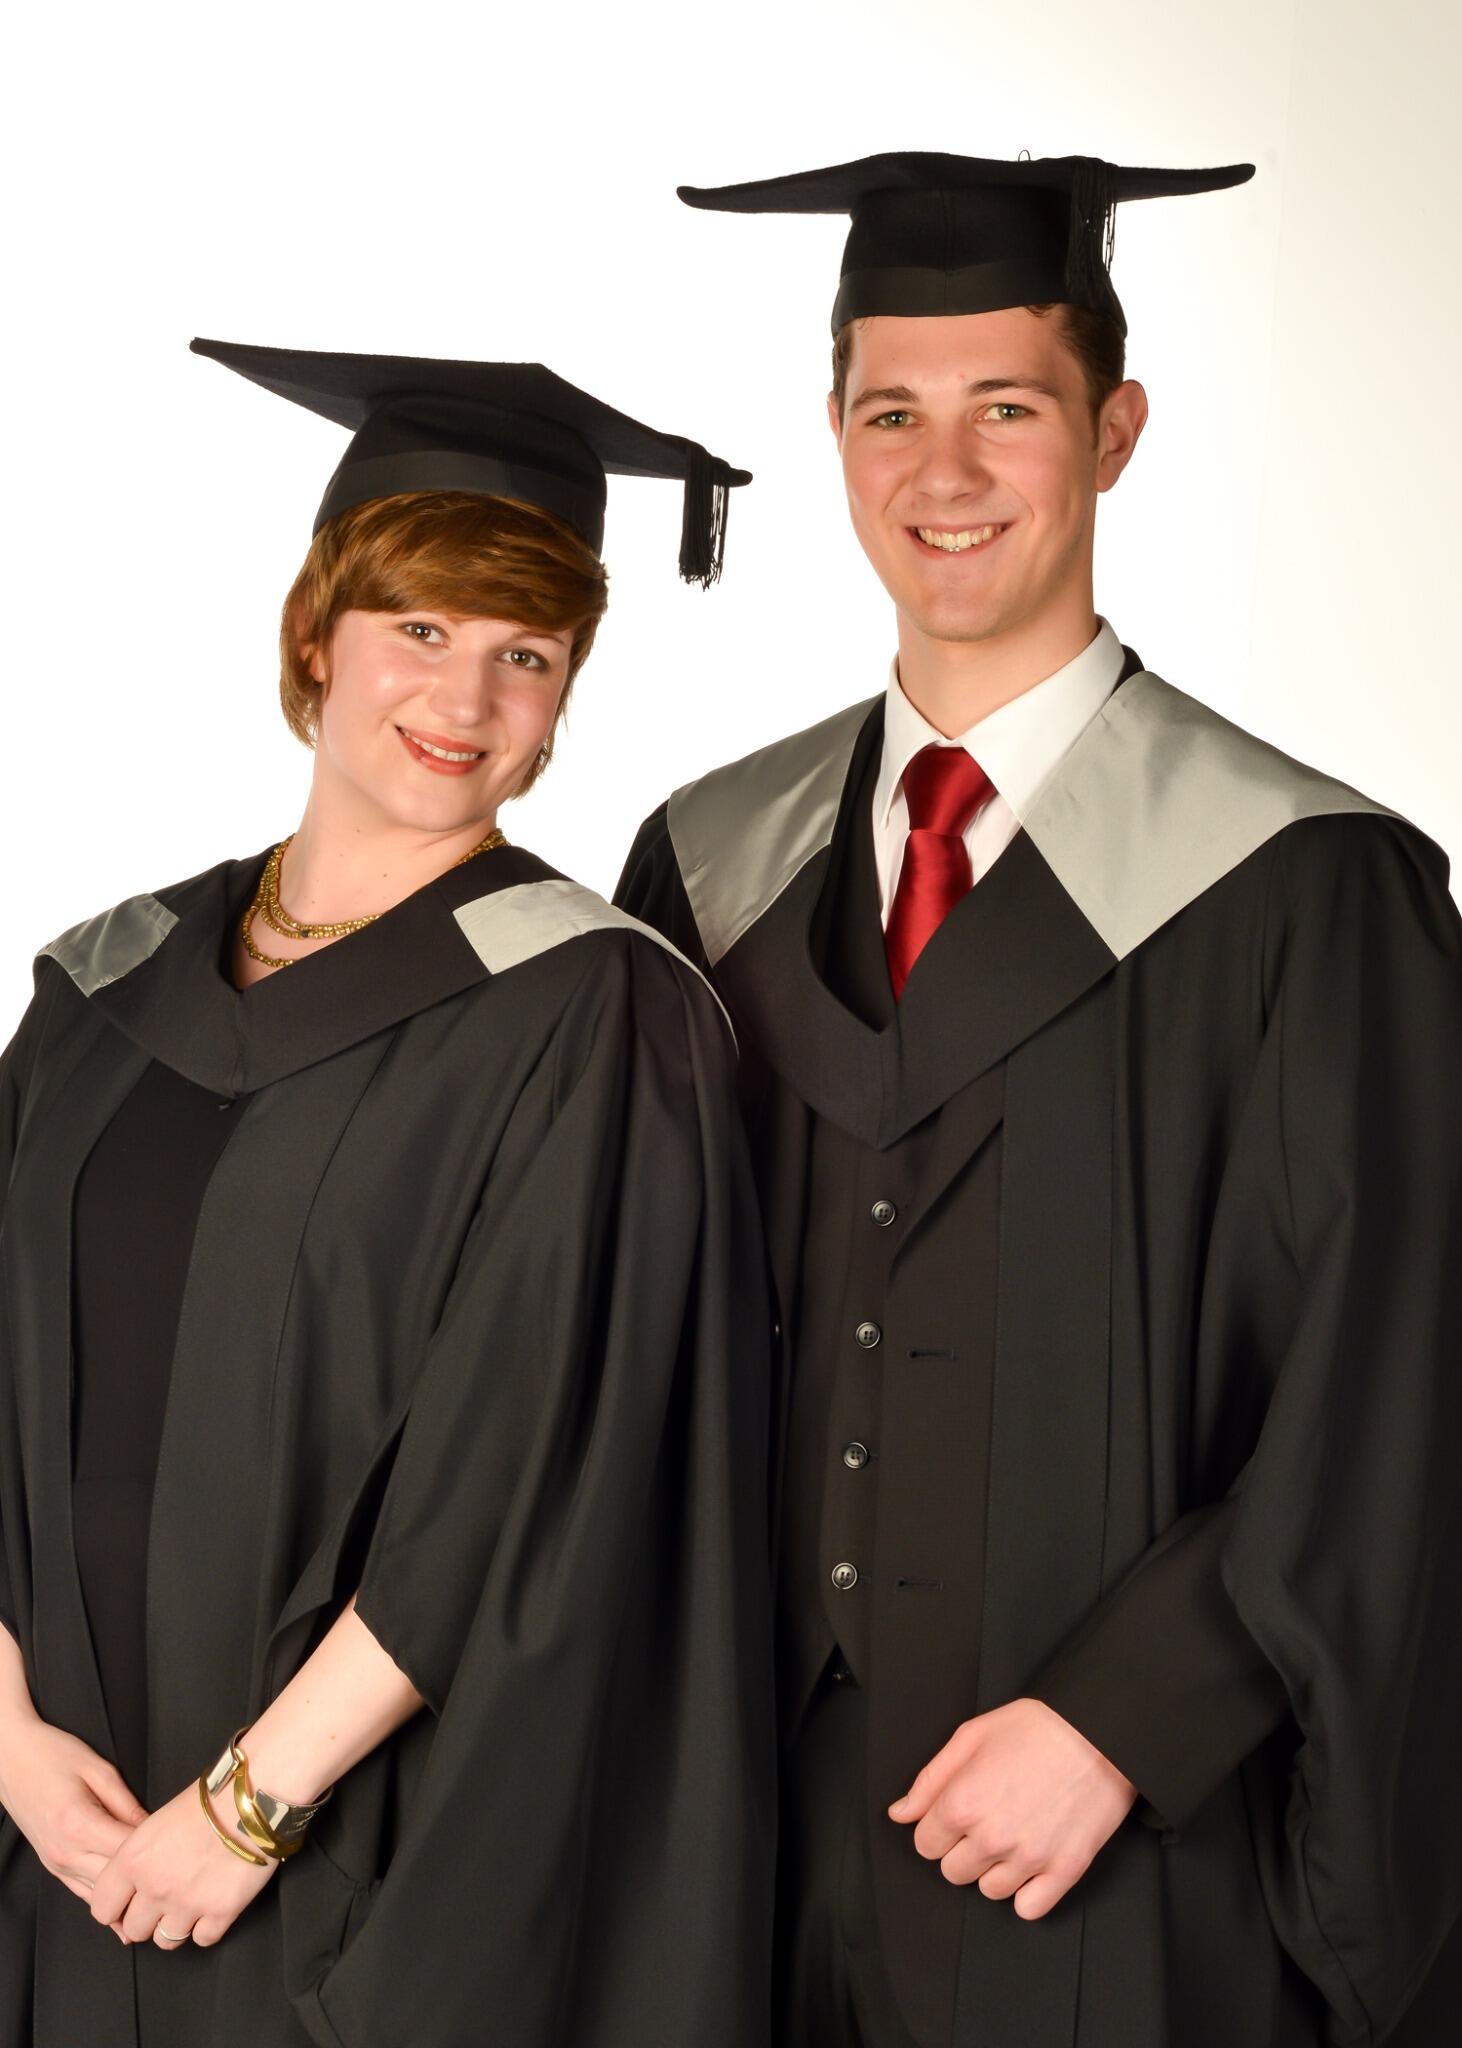 UEL Graduation - You can hire your gown from our appointed gown hire  company, Ede & Ravenscroft. For more info visit our webpage uel.ac.uk/ graduation • • • • #uelgrad2019 #graduation #londongraduate  #studyinginlondon | Facebook